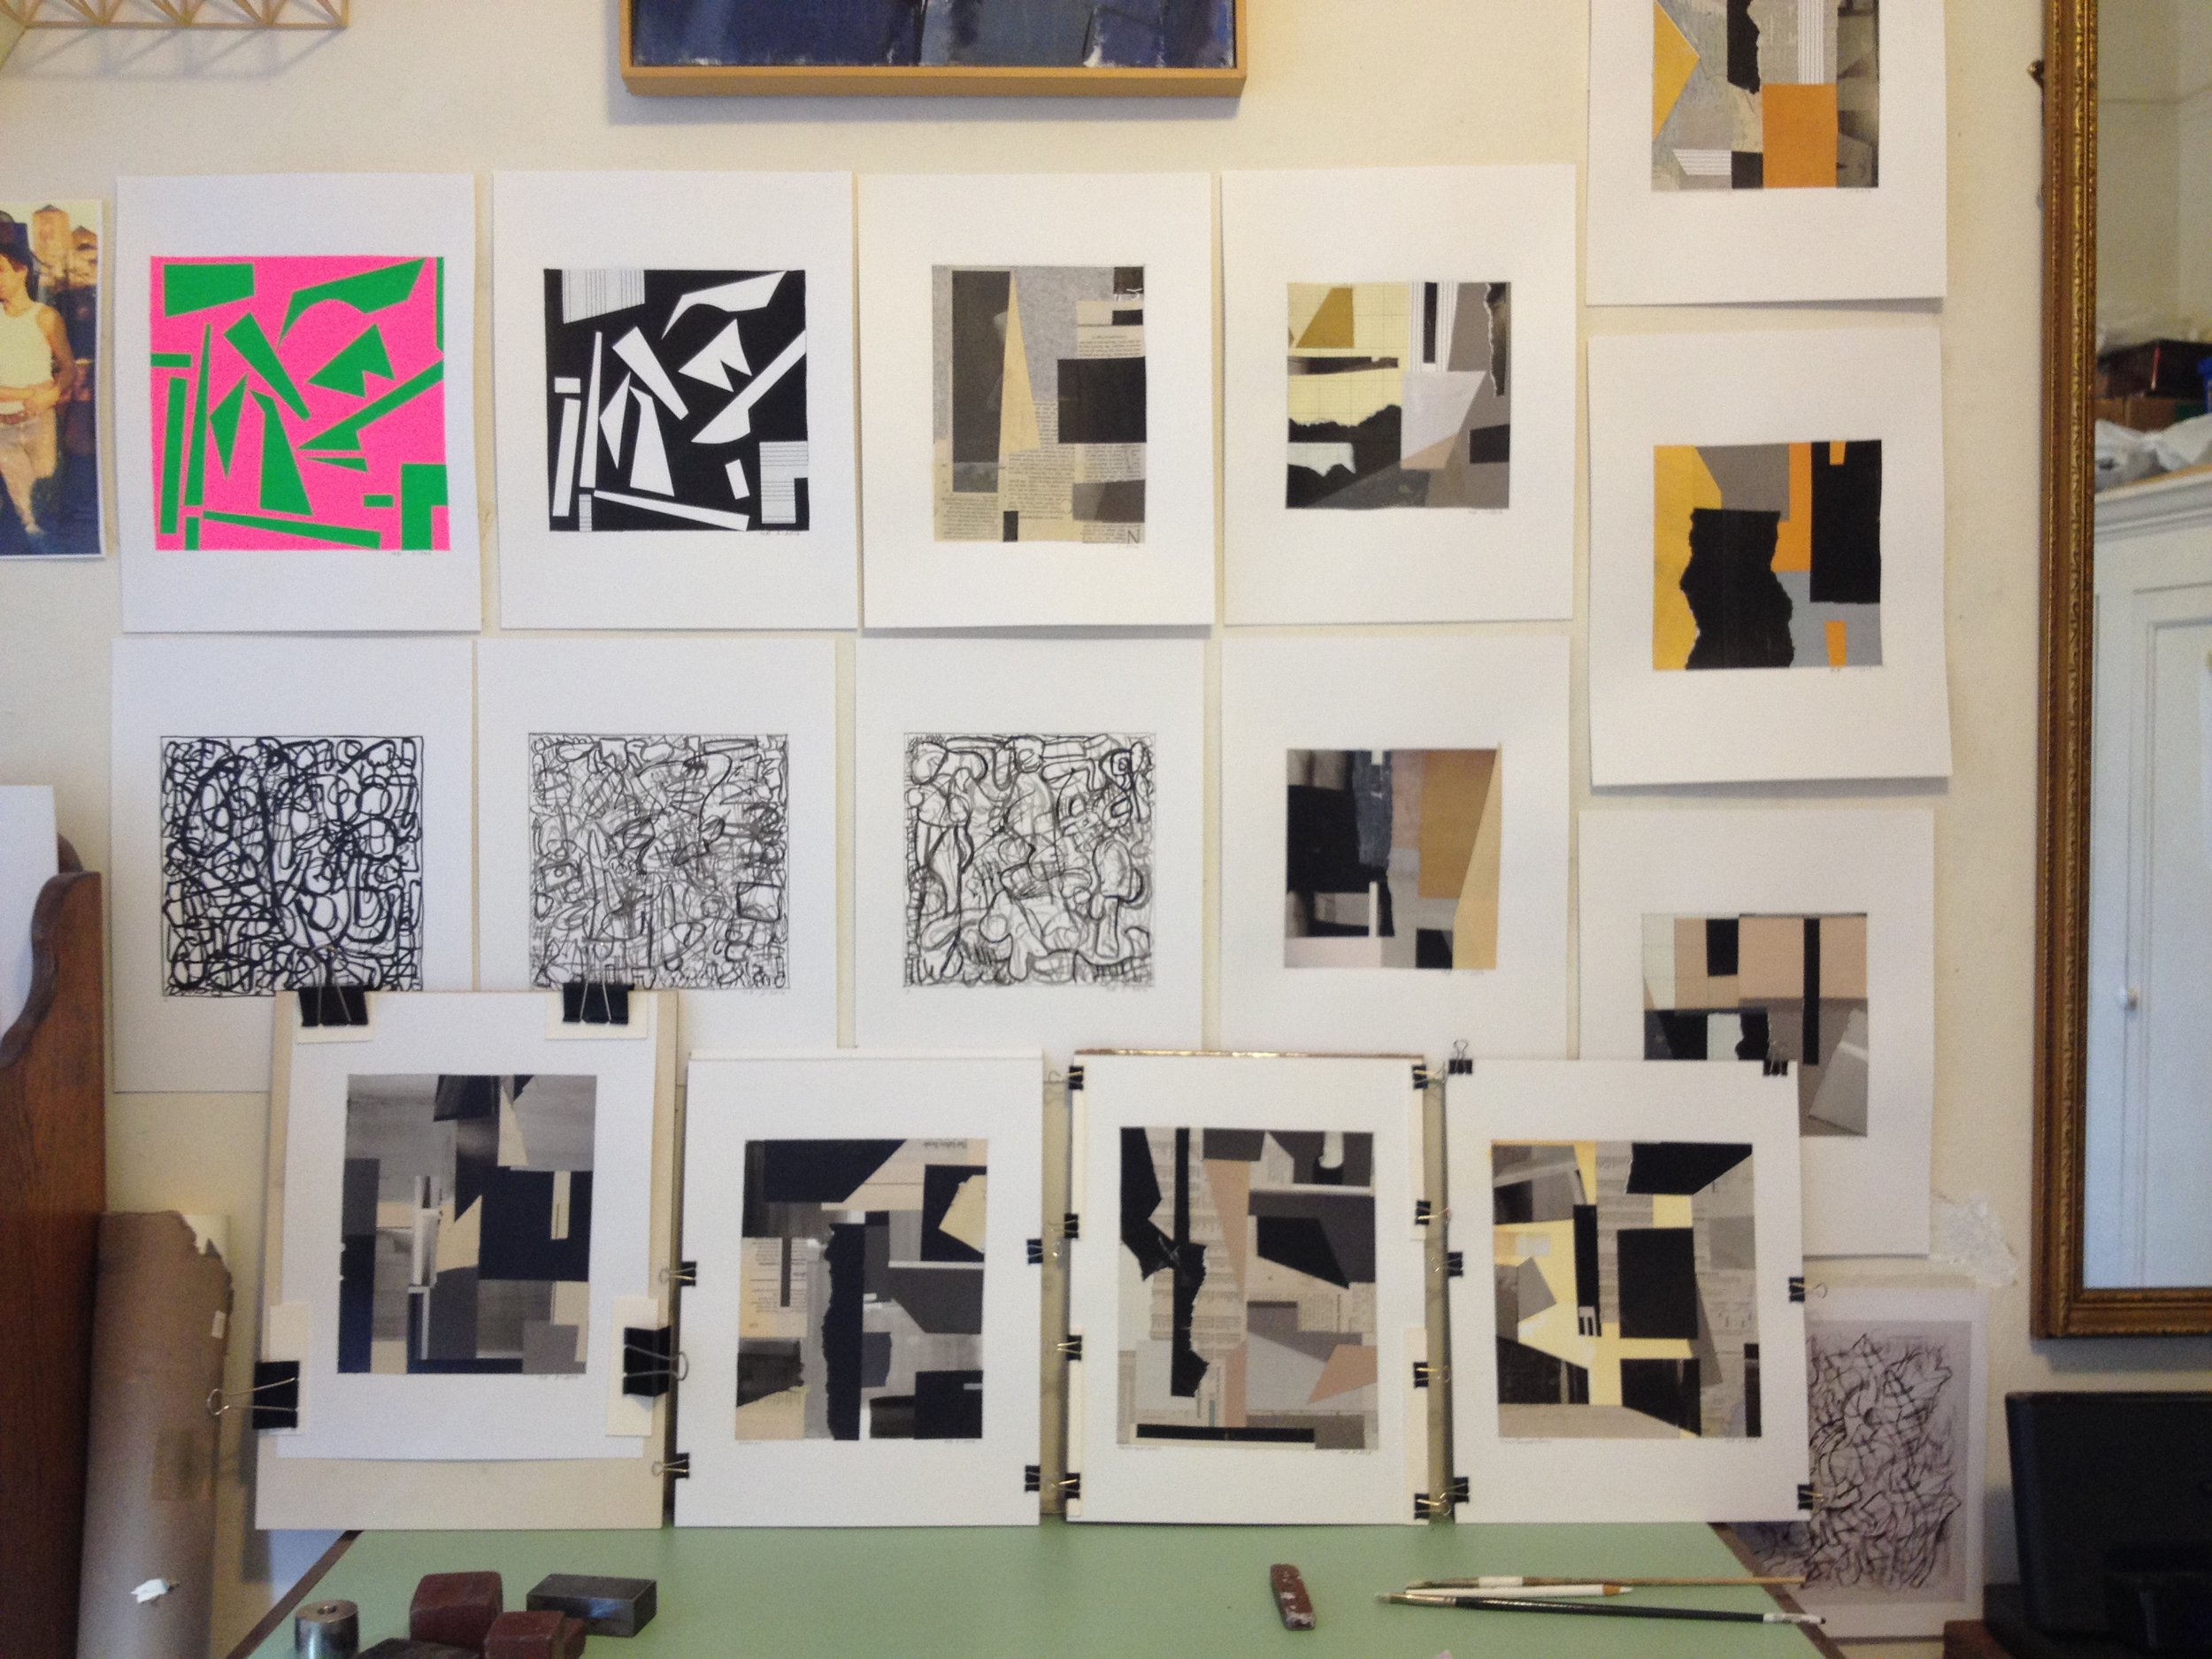   Studio wall with collages  